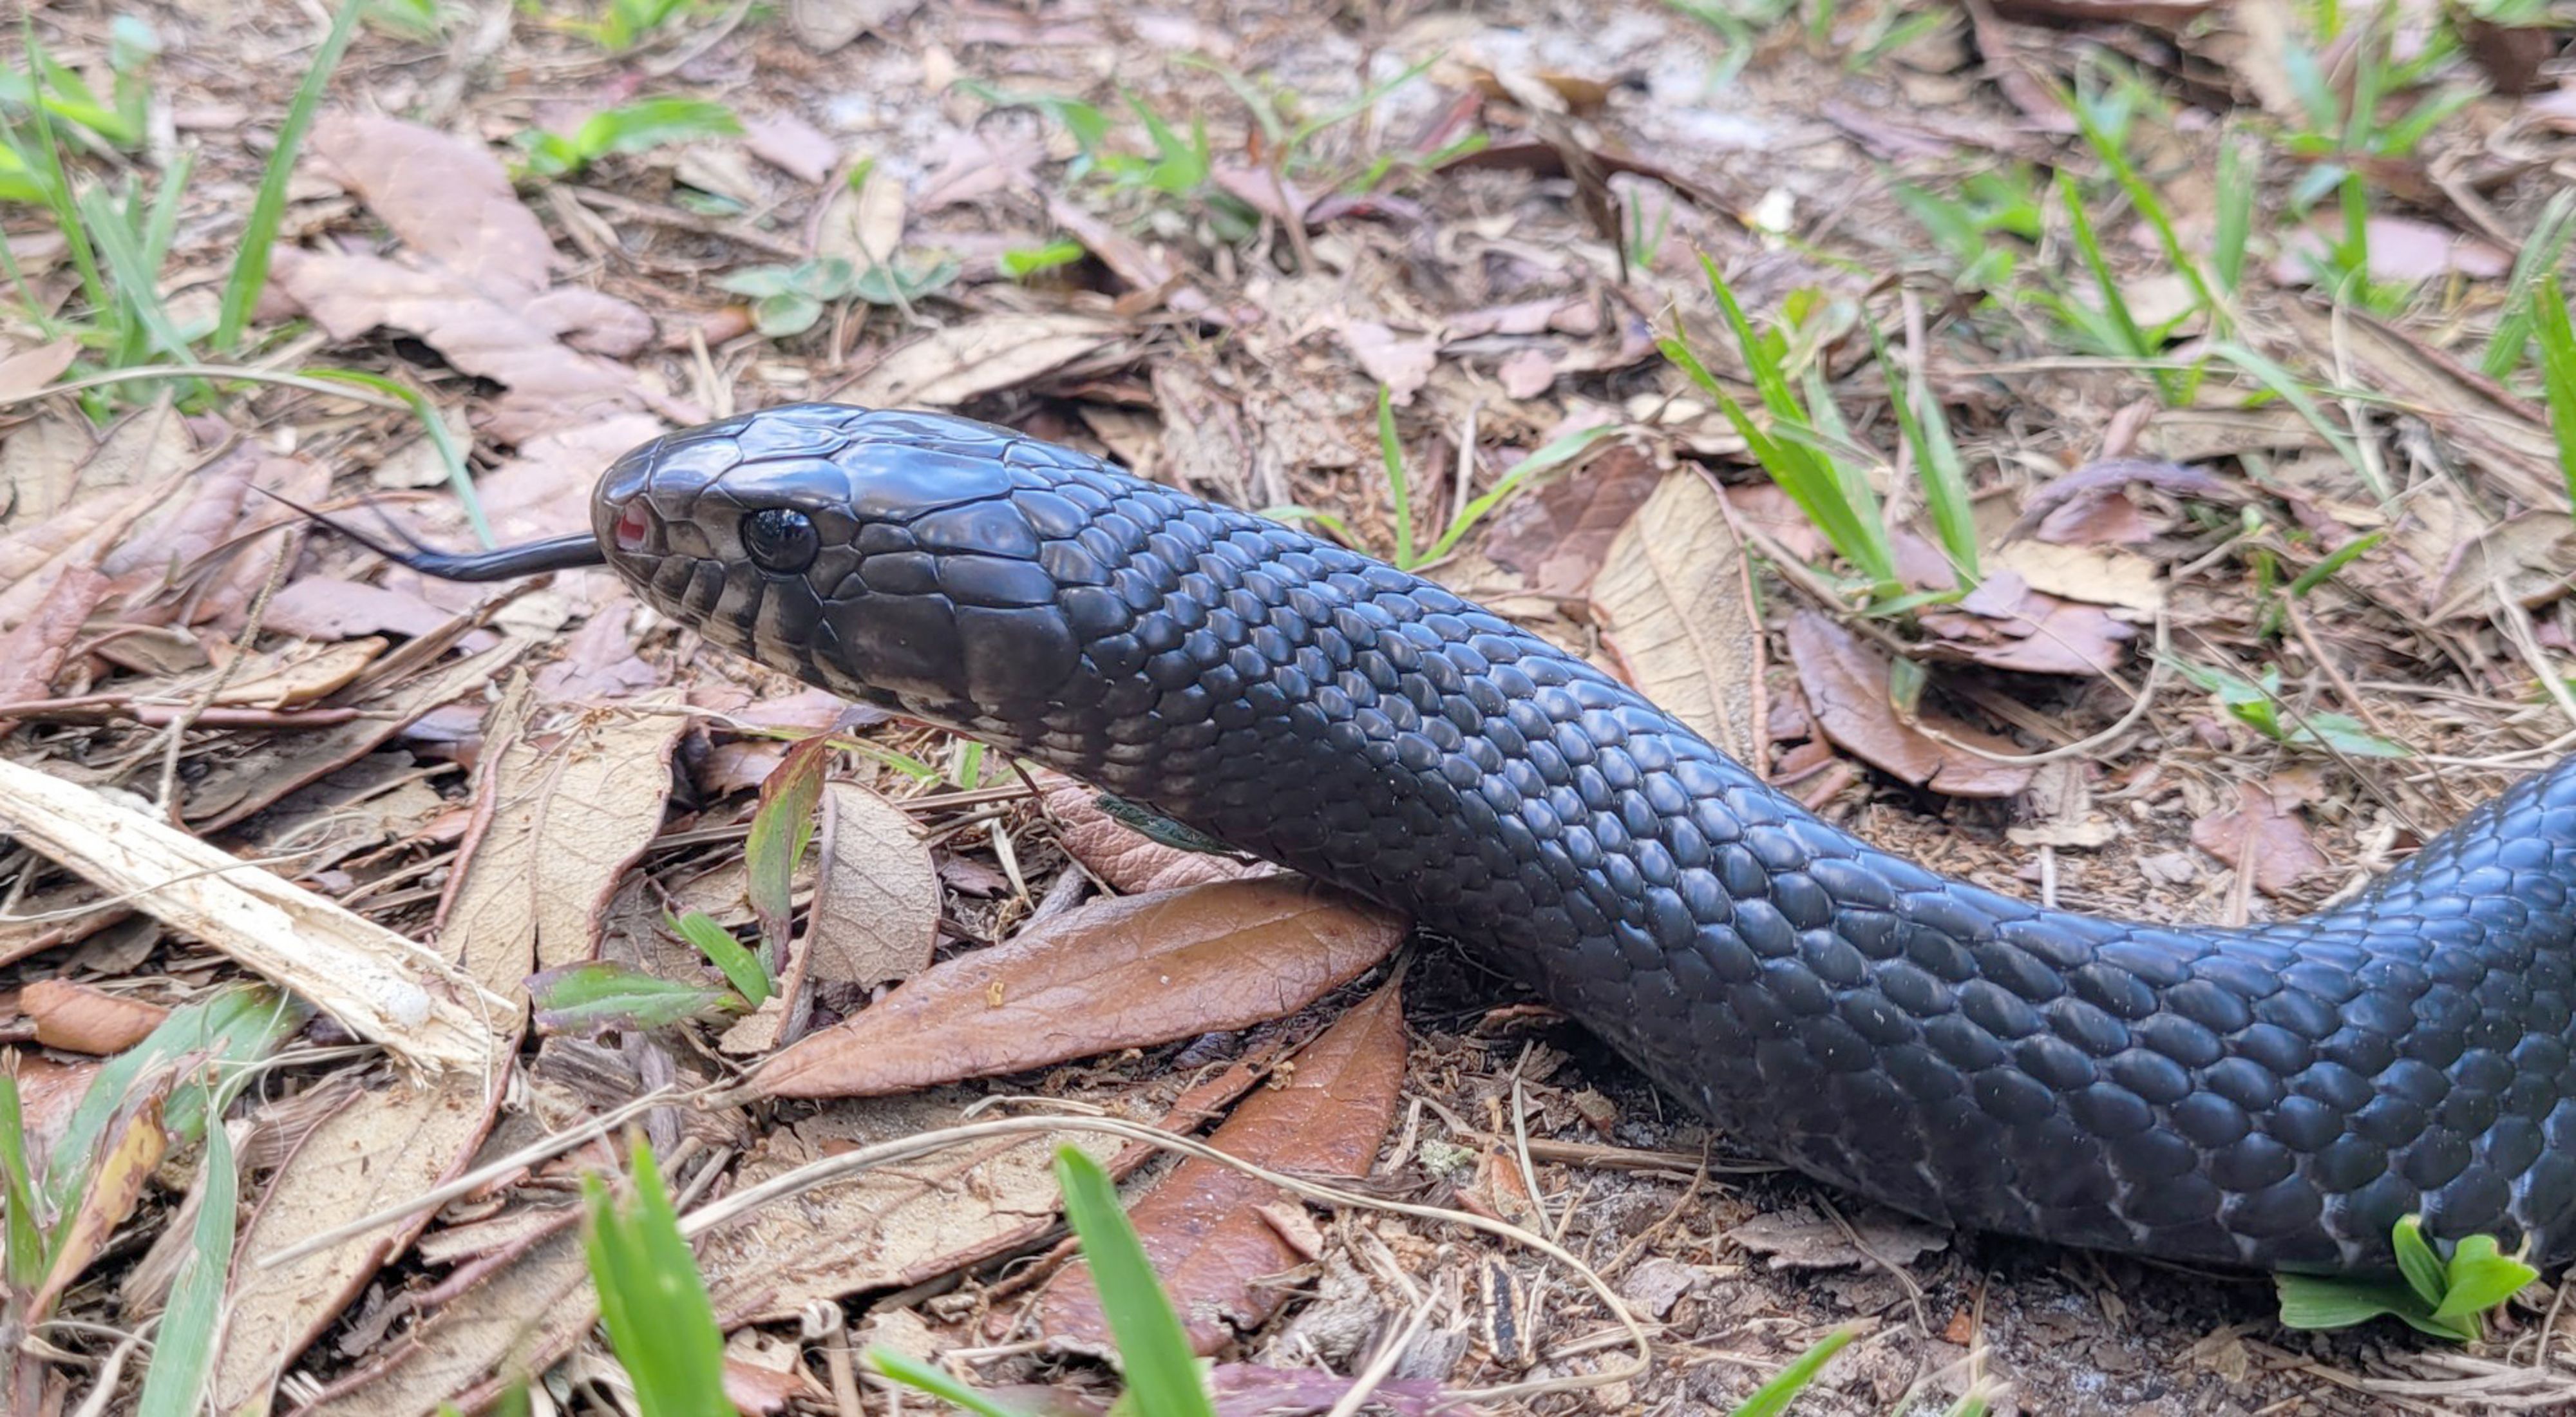 26 Indigo Snakes Released | The Nature Conservancy